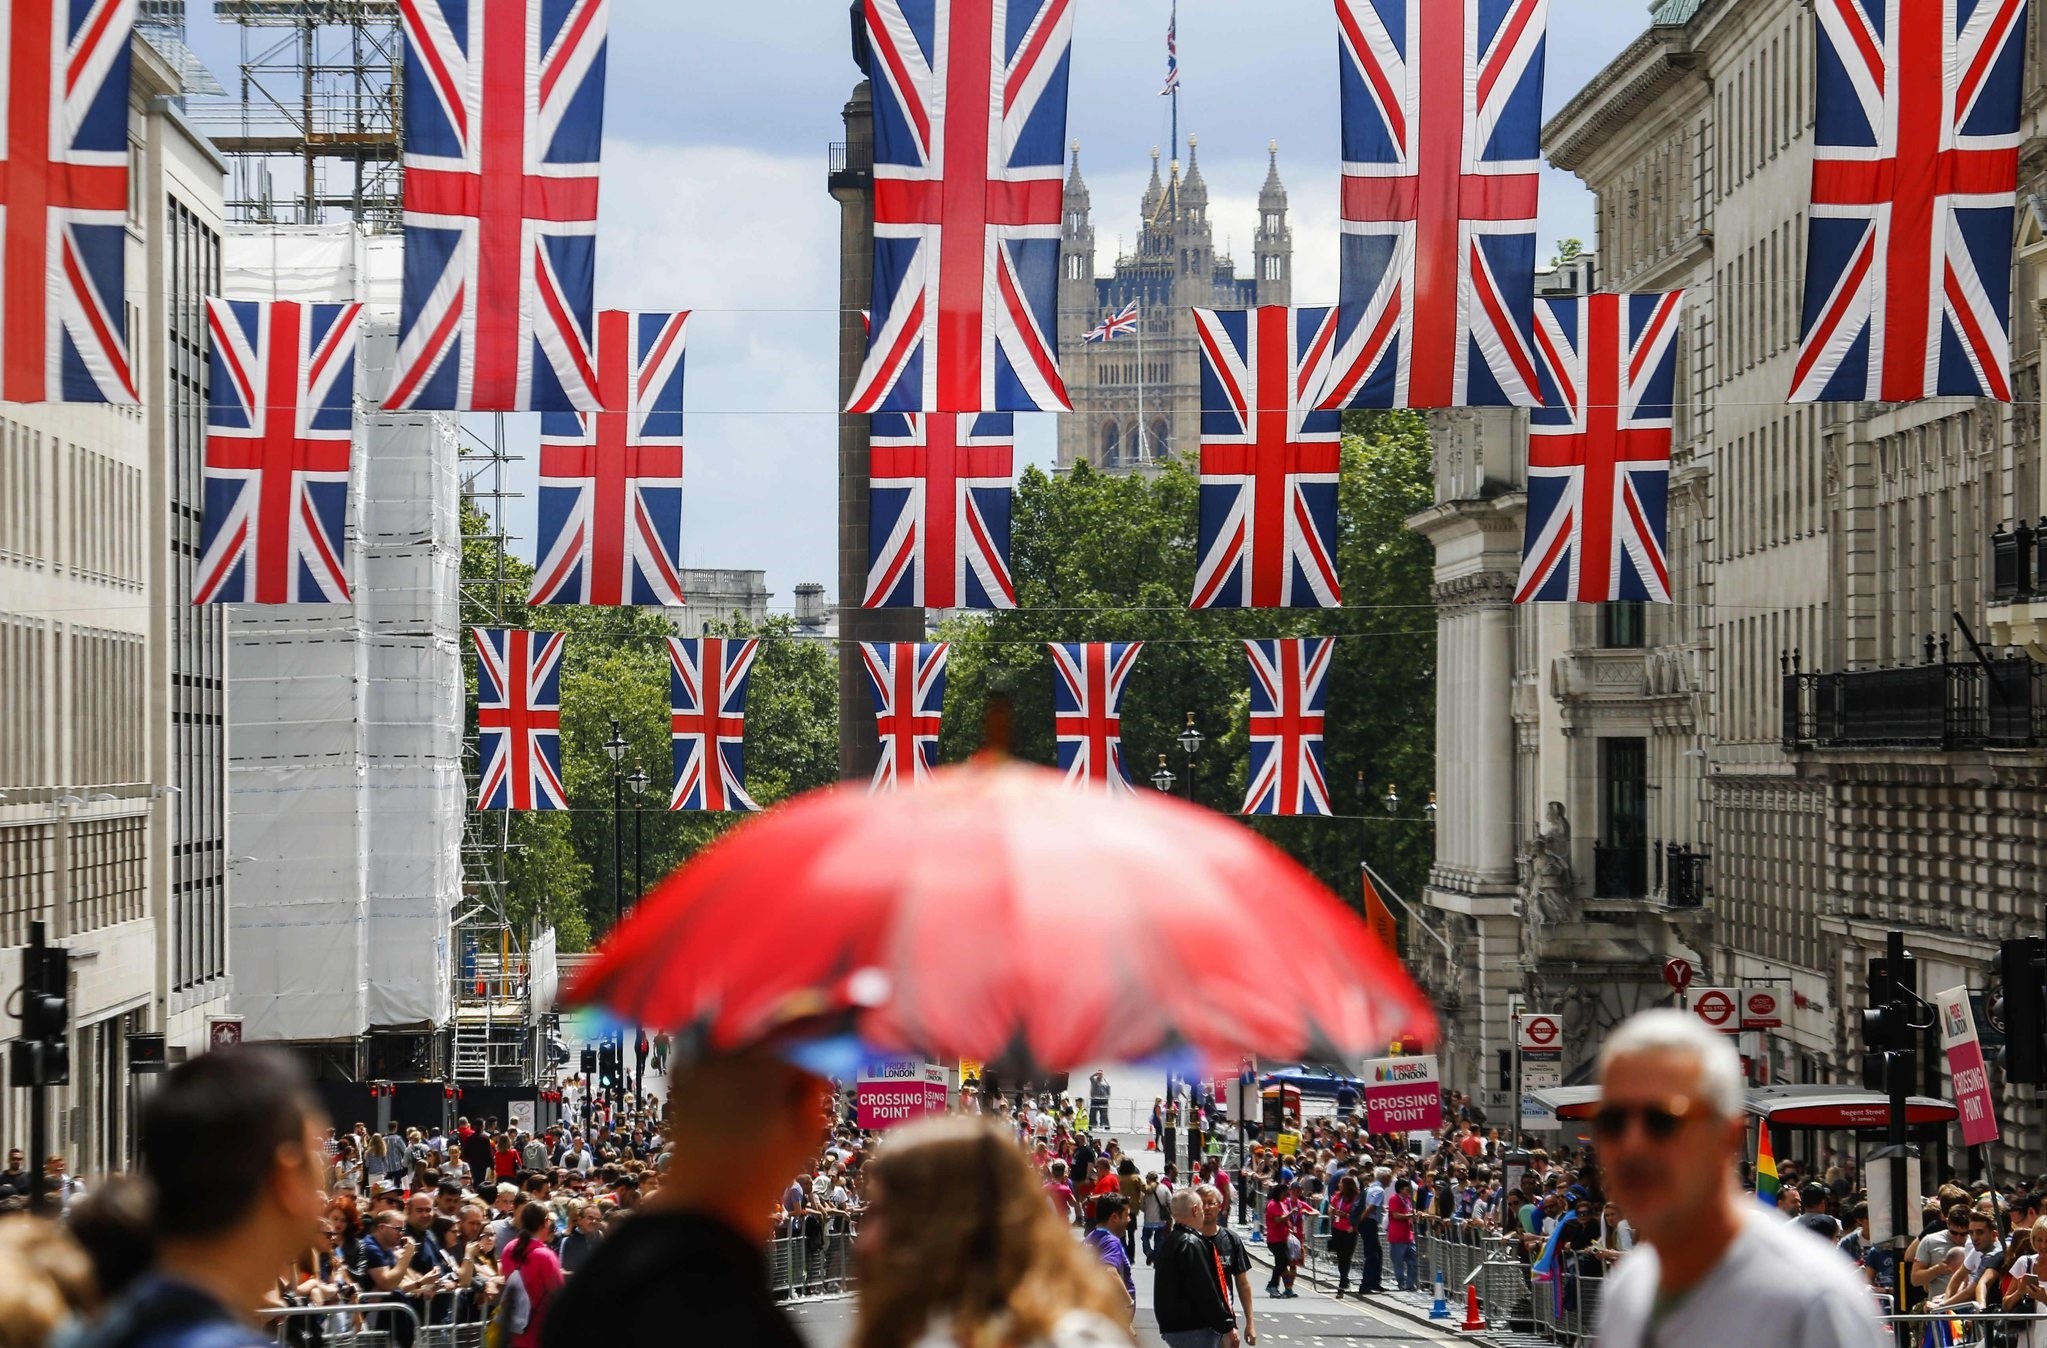 British flag banners hang across a street near the houses of Parliament in Central London after the announcement of results of shocking Brexit vote, June 25, 2016. (AFP Photo)